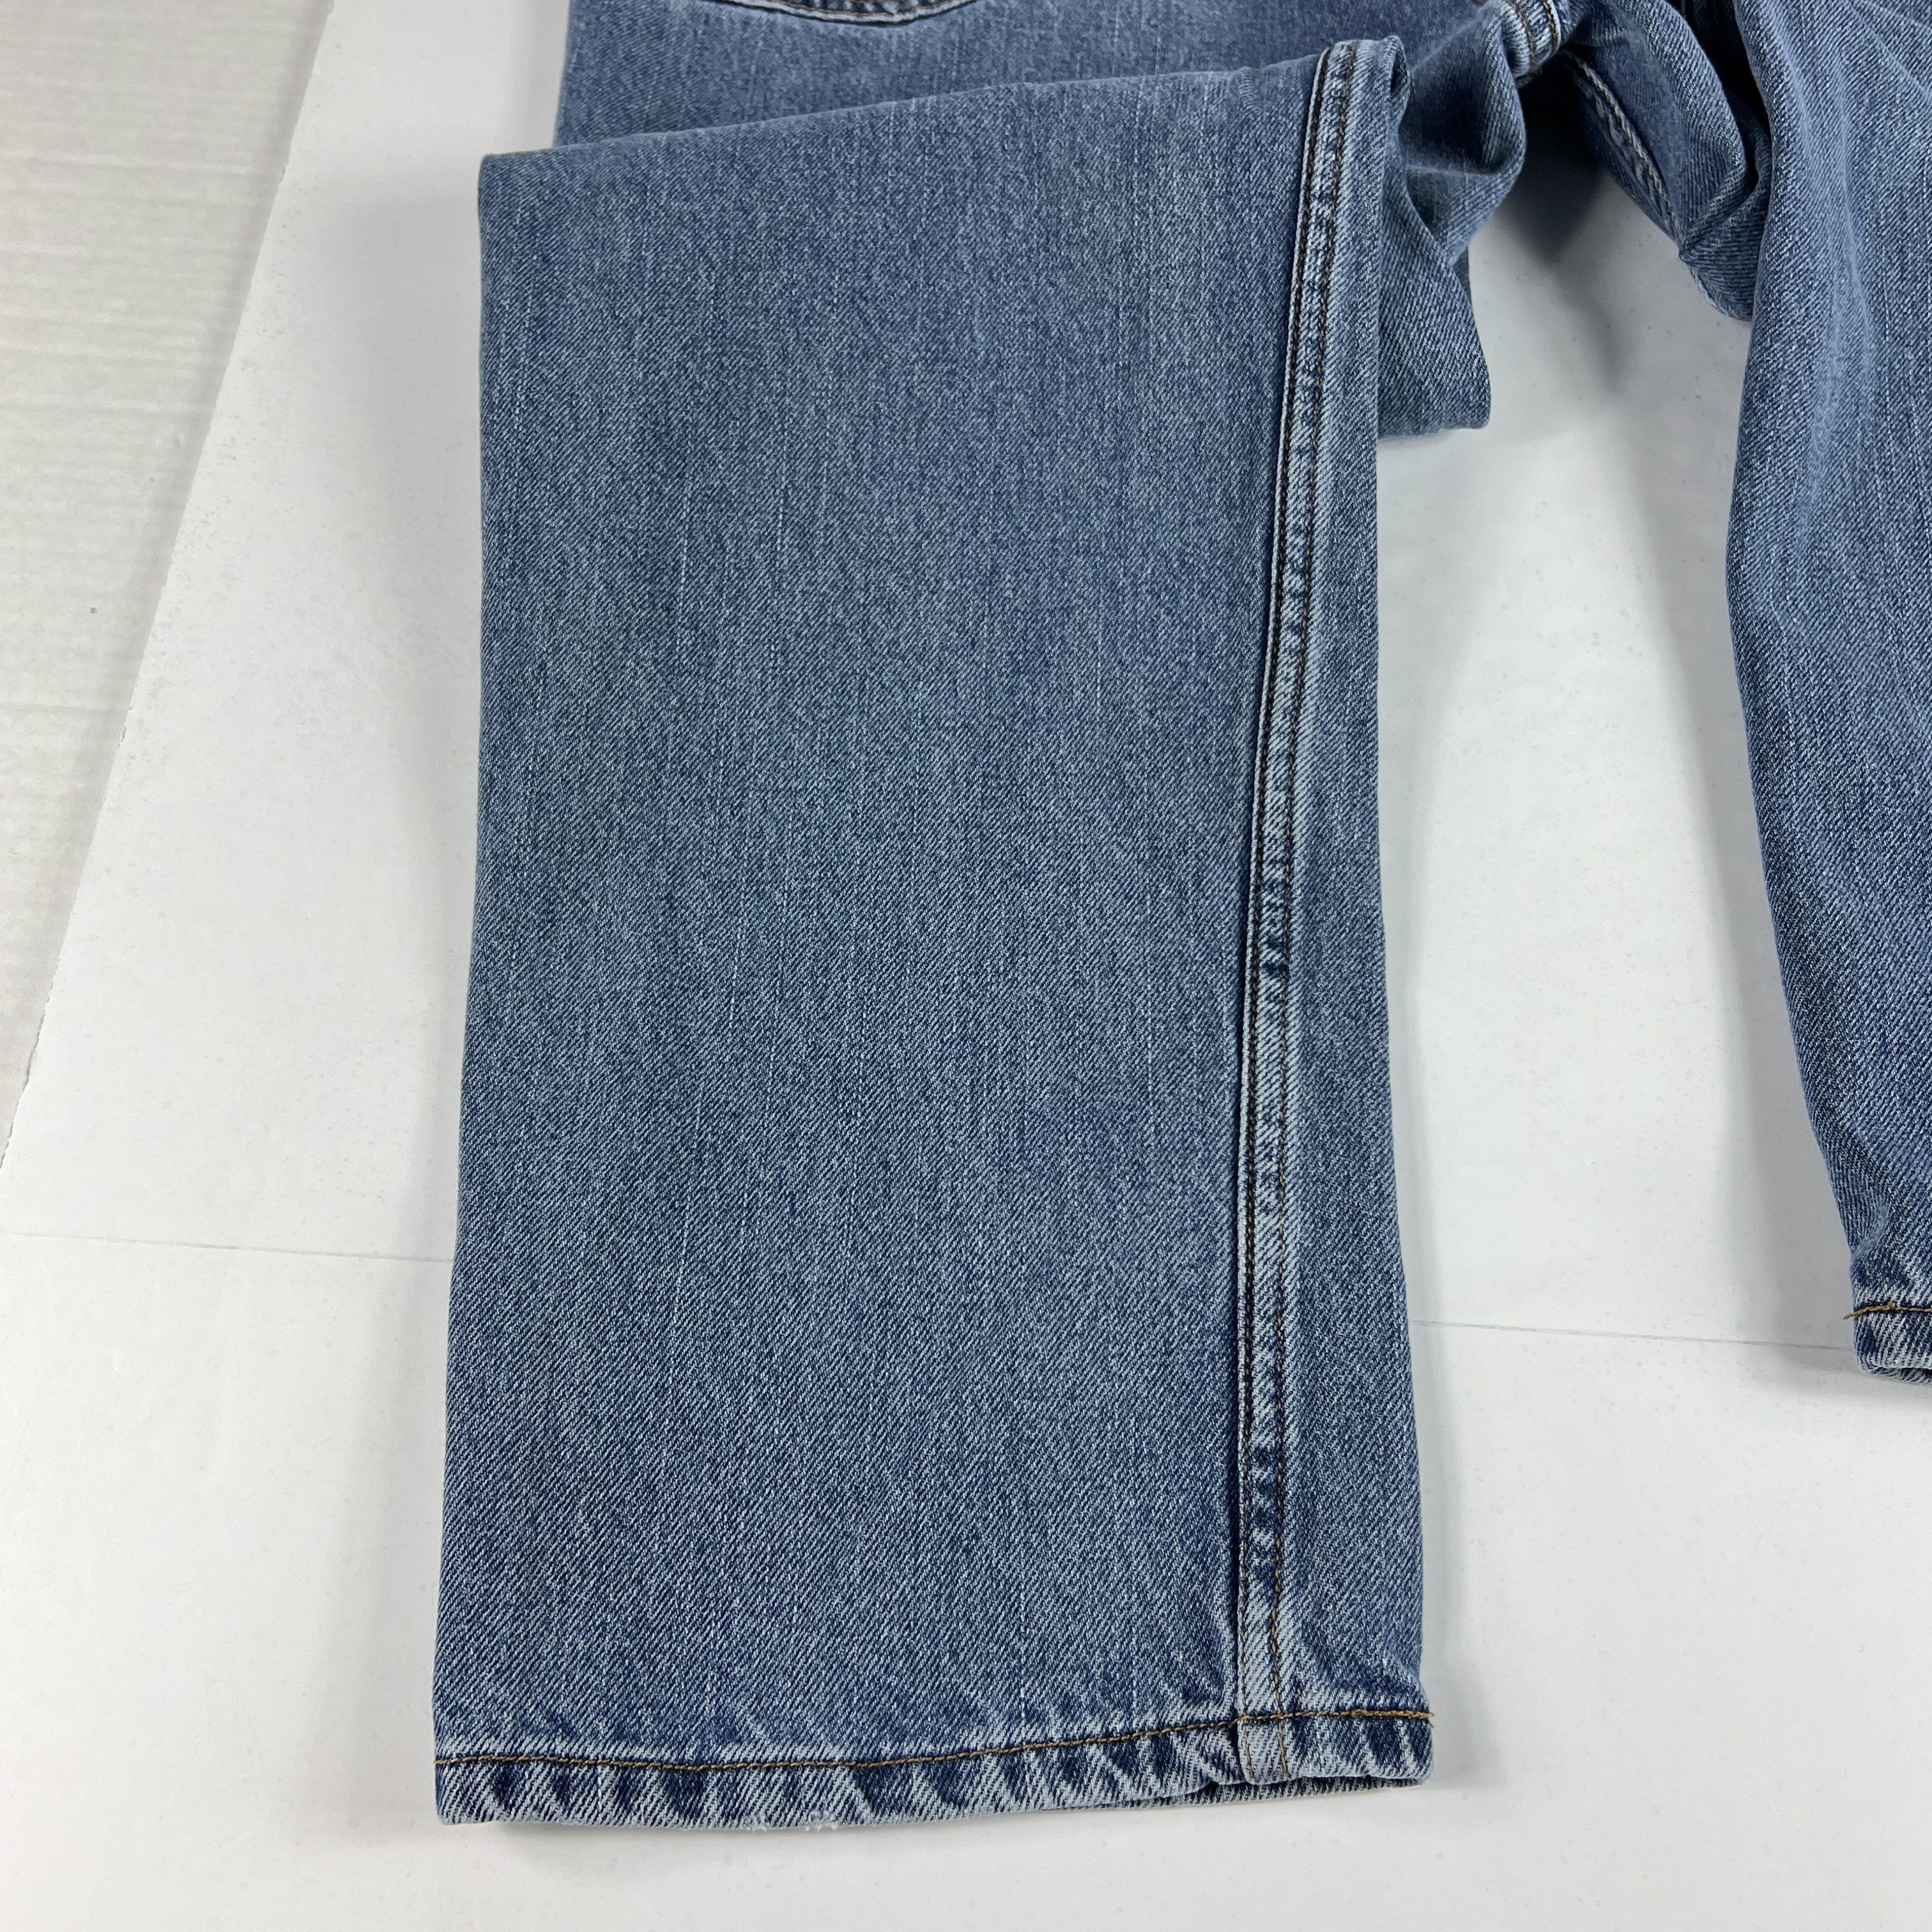 Levi's Y2K Levi's Jean 550 Relaxed Straight Blue Faded Cotton Denim Size US 34 / EU 50 - 17 Thumbnail